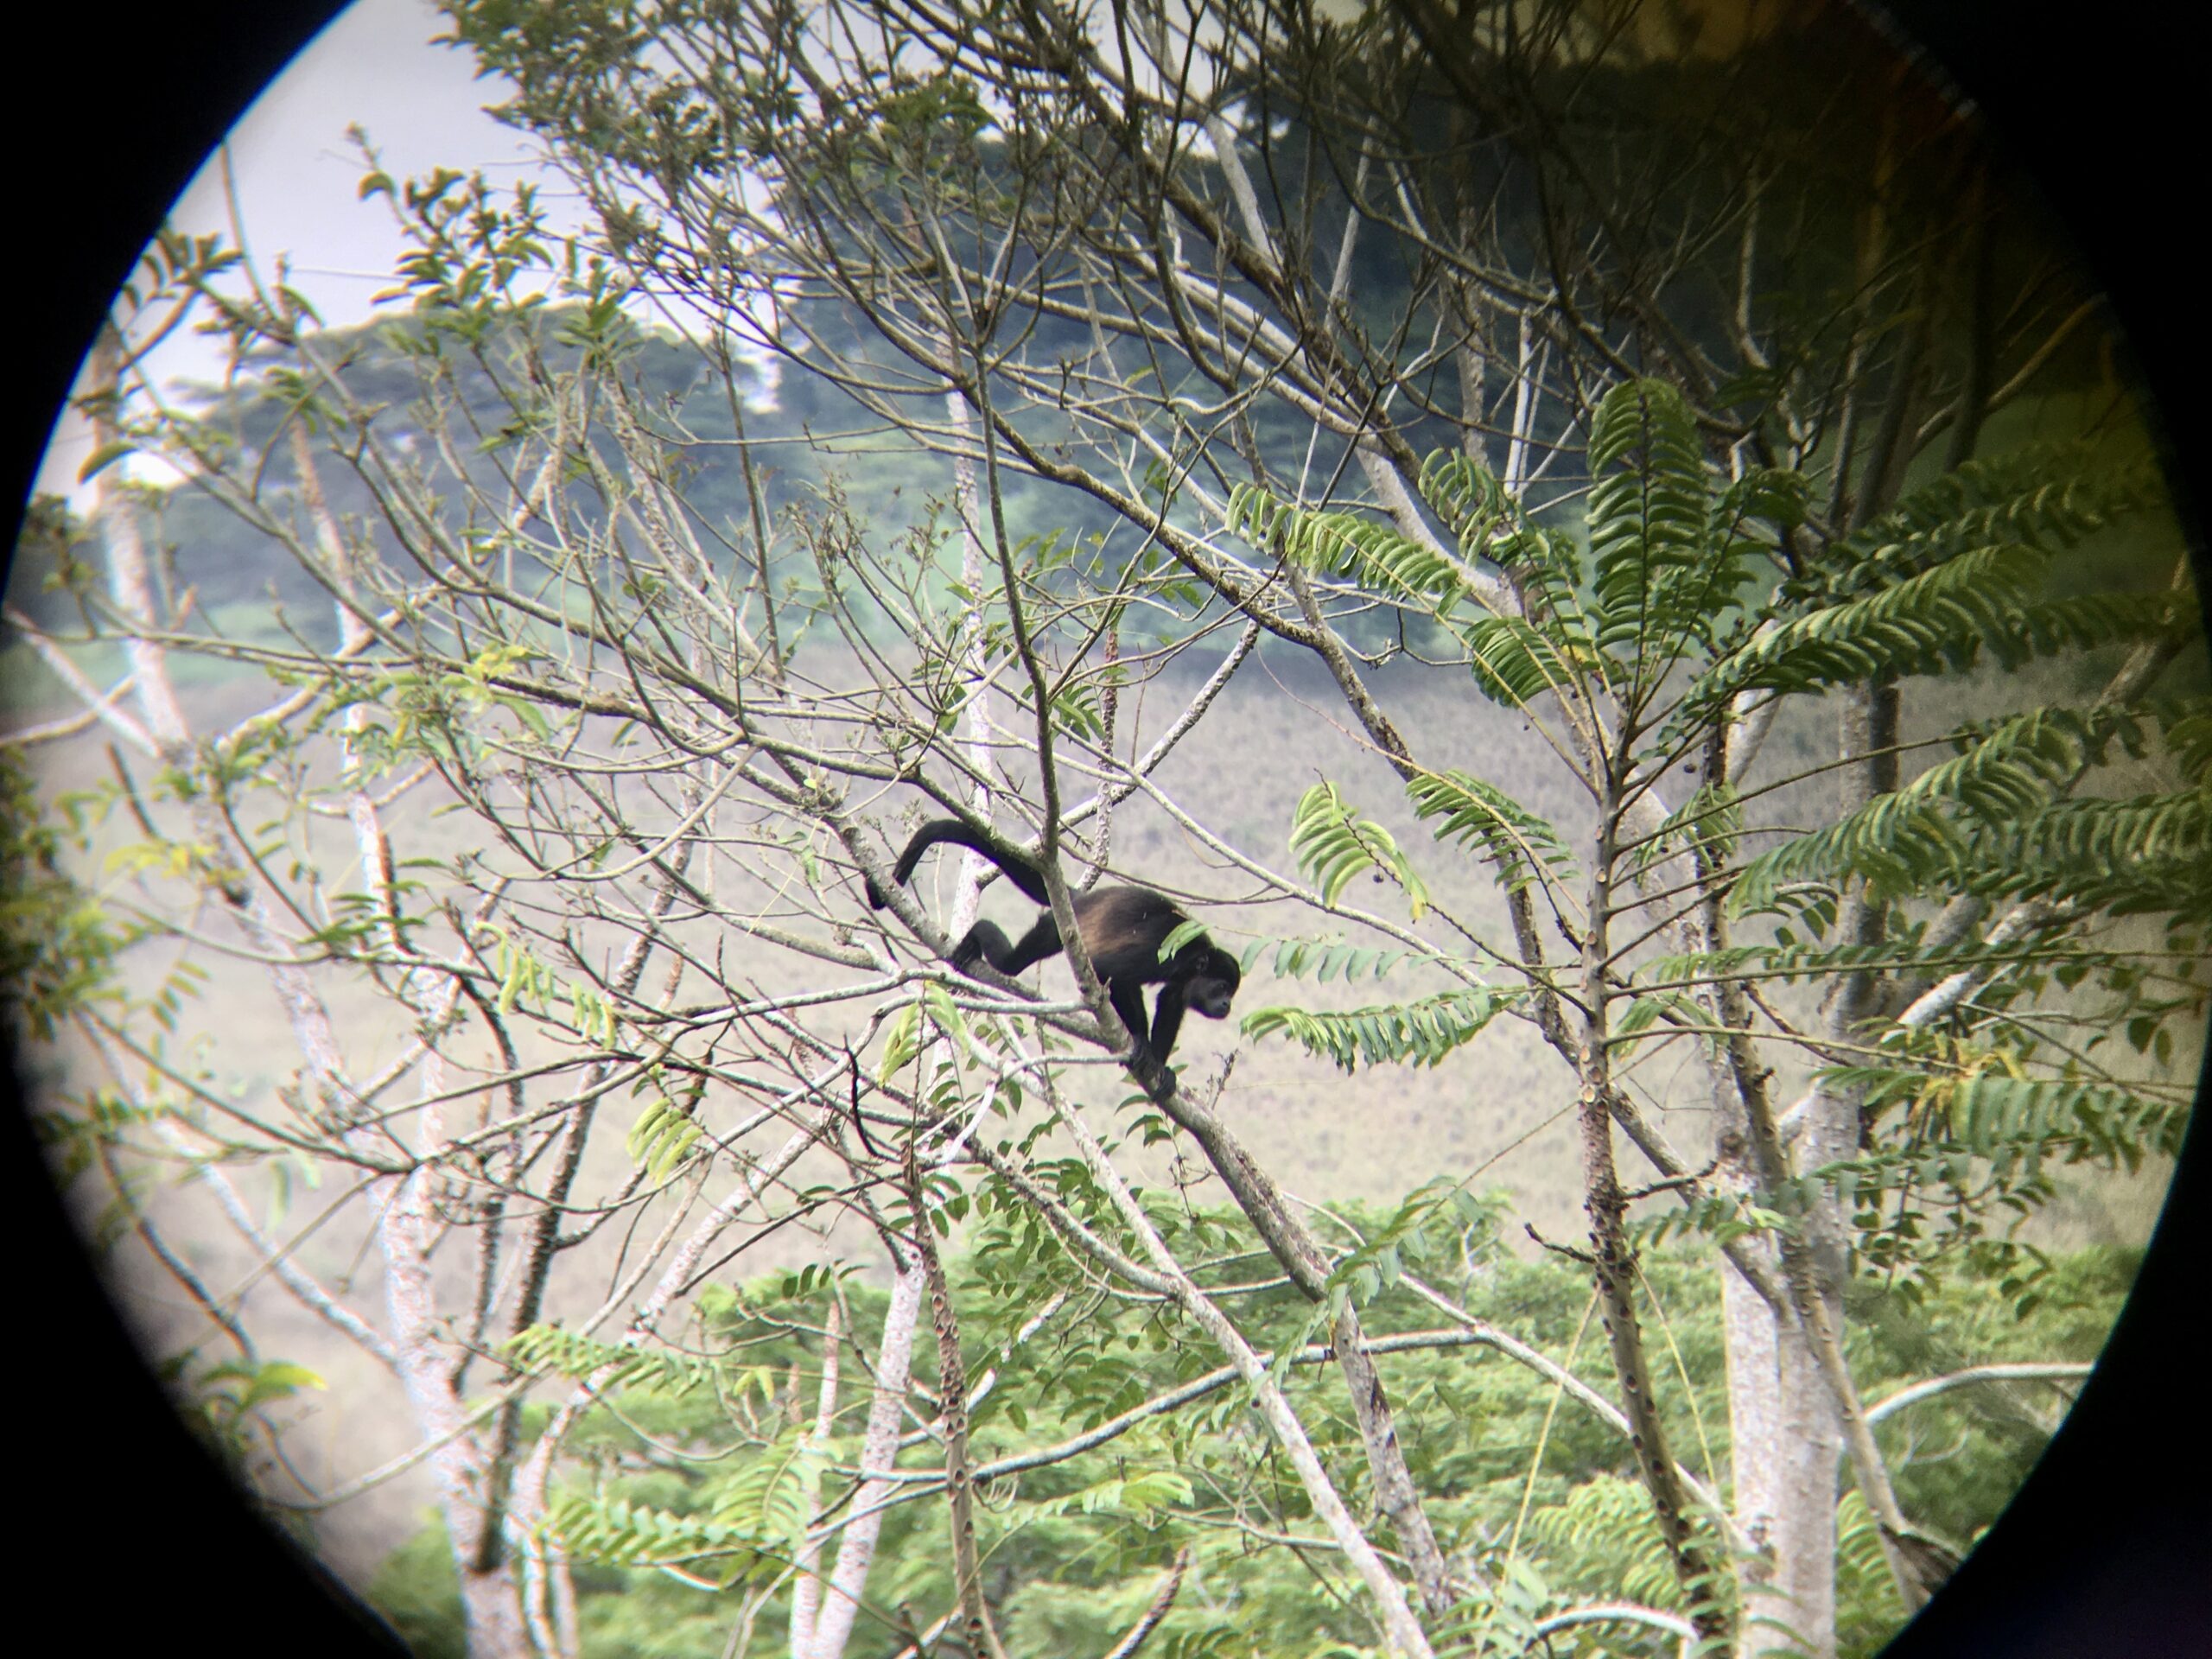 Howler and capuchin monkeys are native to this part of Ecuador